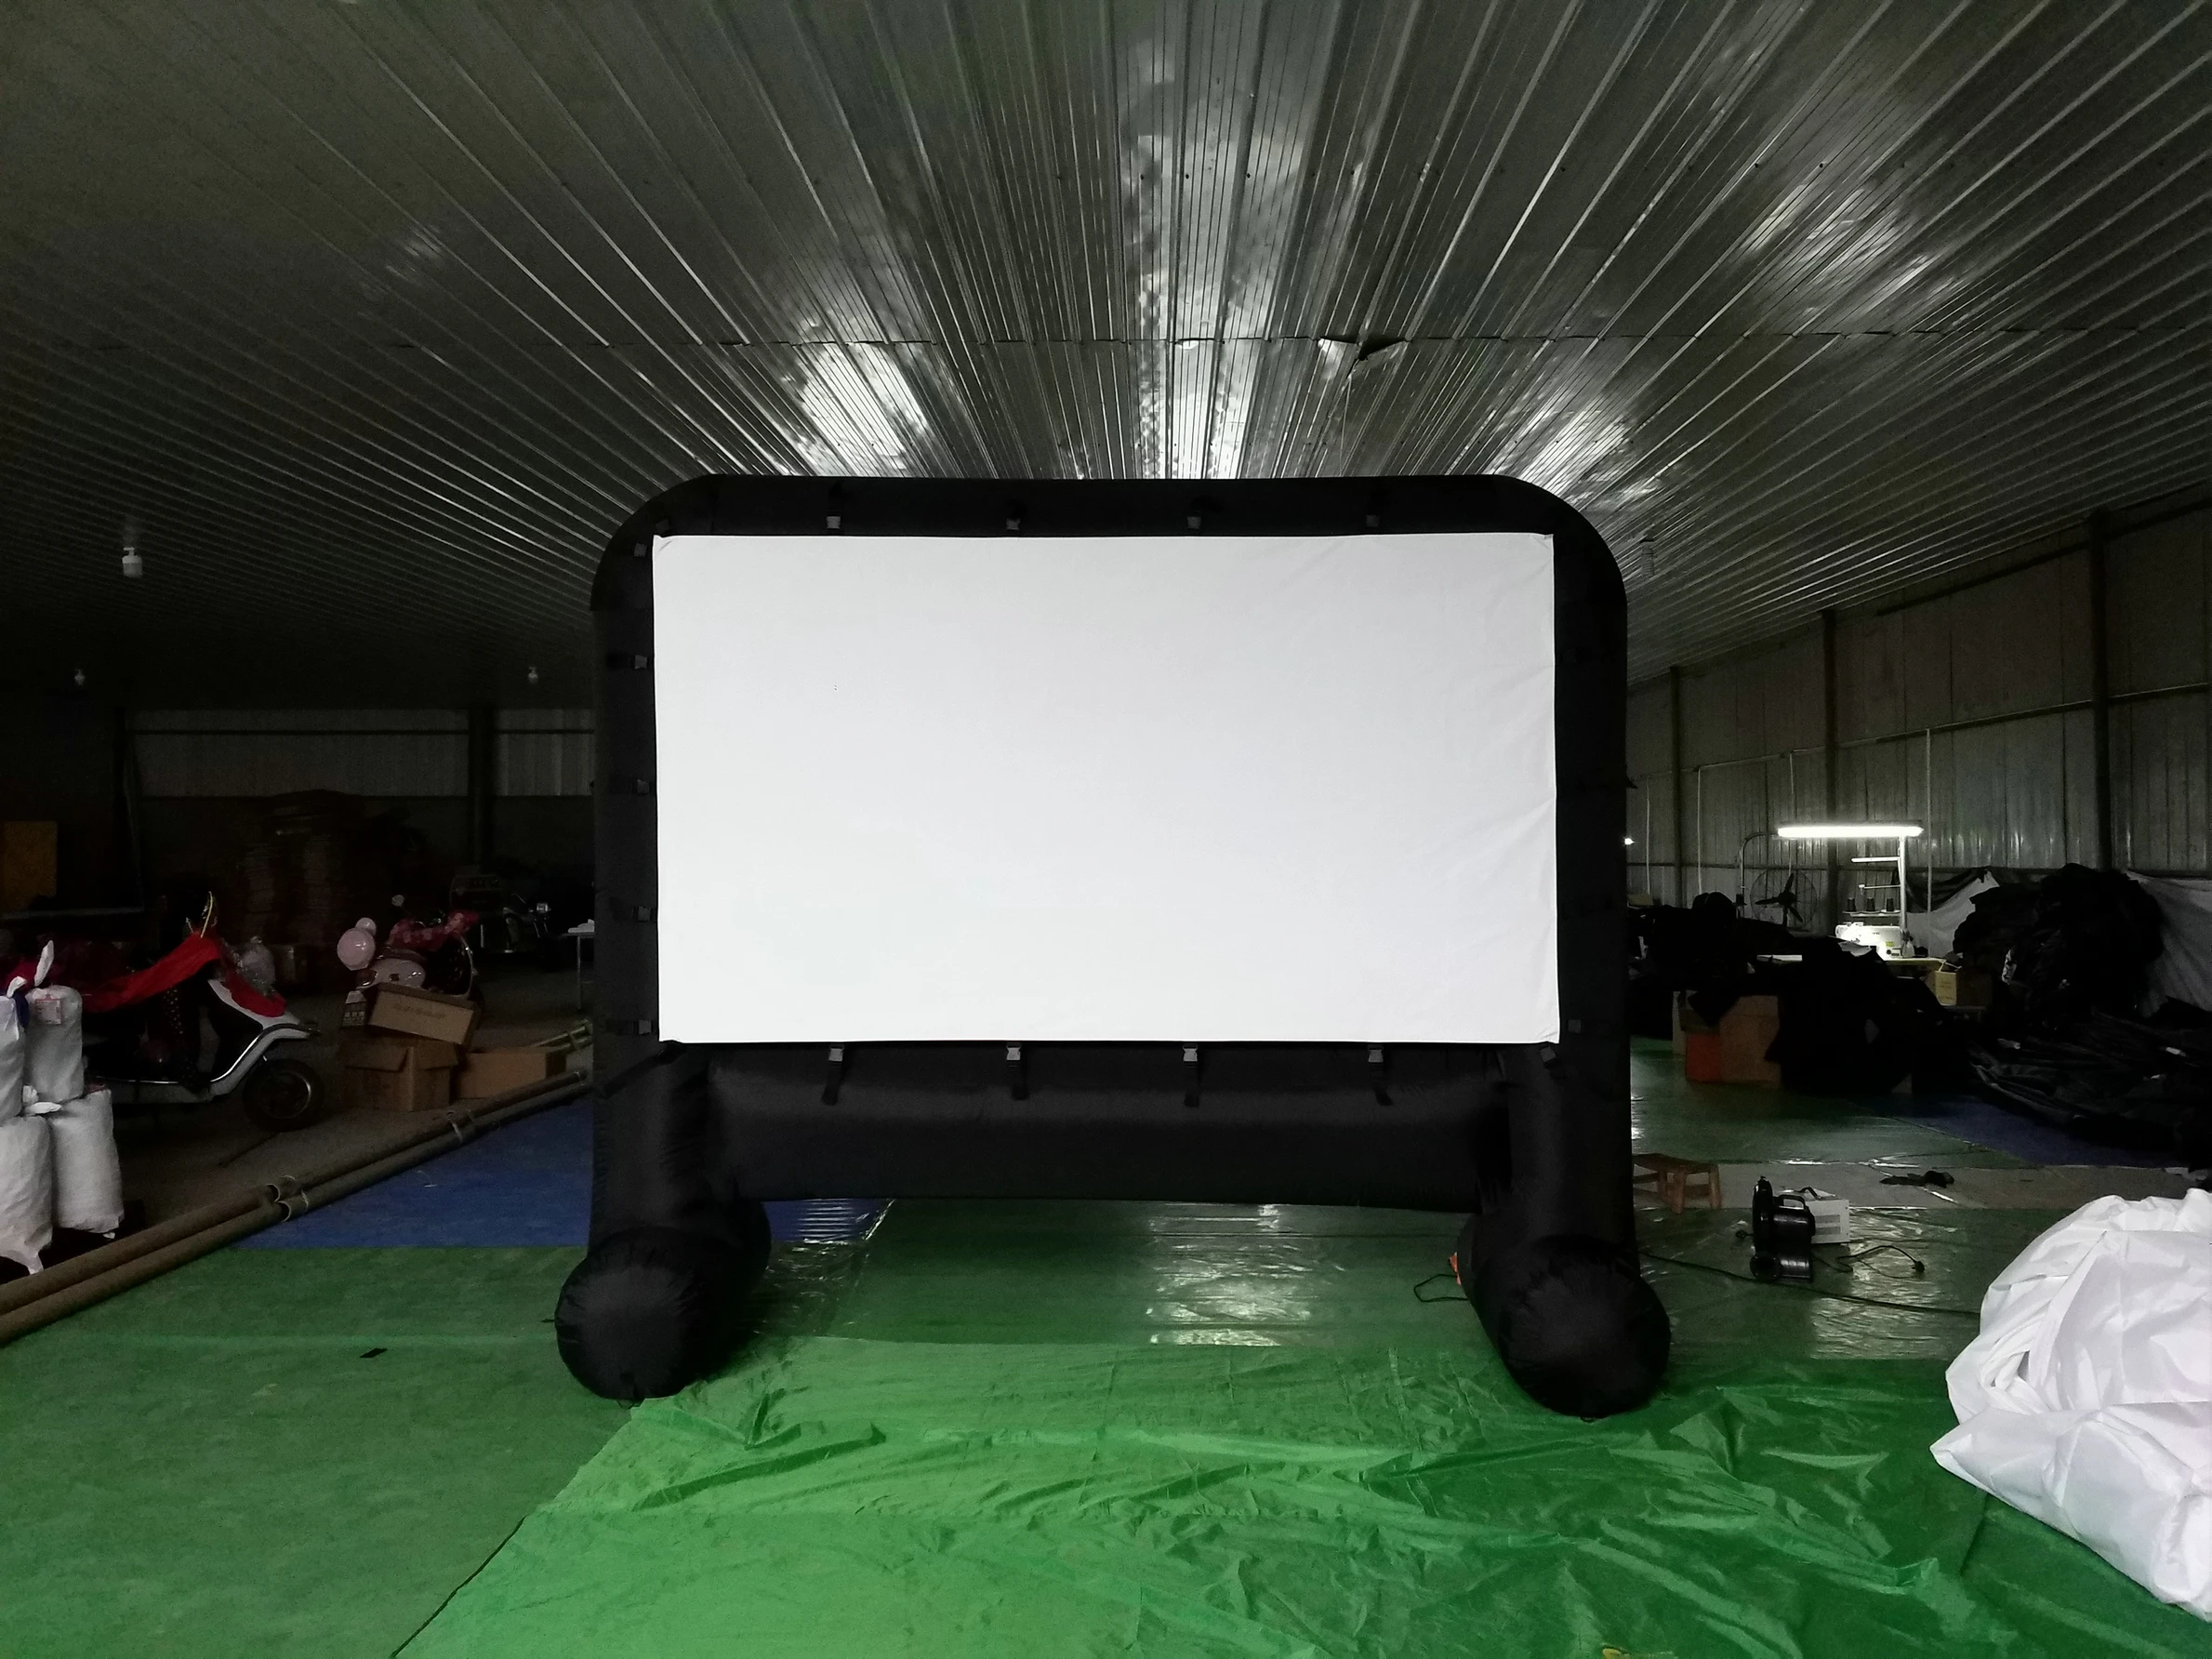 blowup movie screen